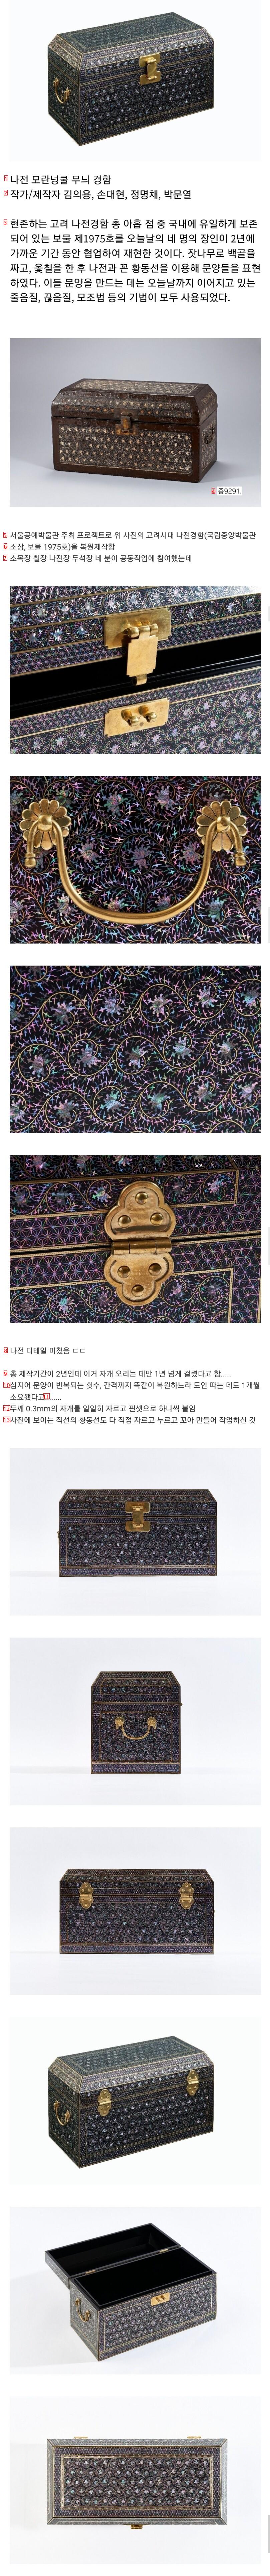 The quality of the finished product of the Goryeo Dynasty's Na Jeon-kyung box, which took four Korean craftsmen two years to restore.